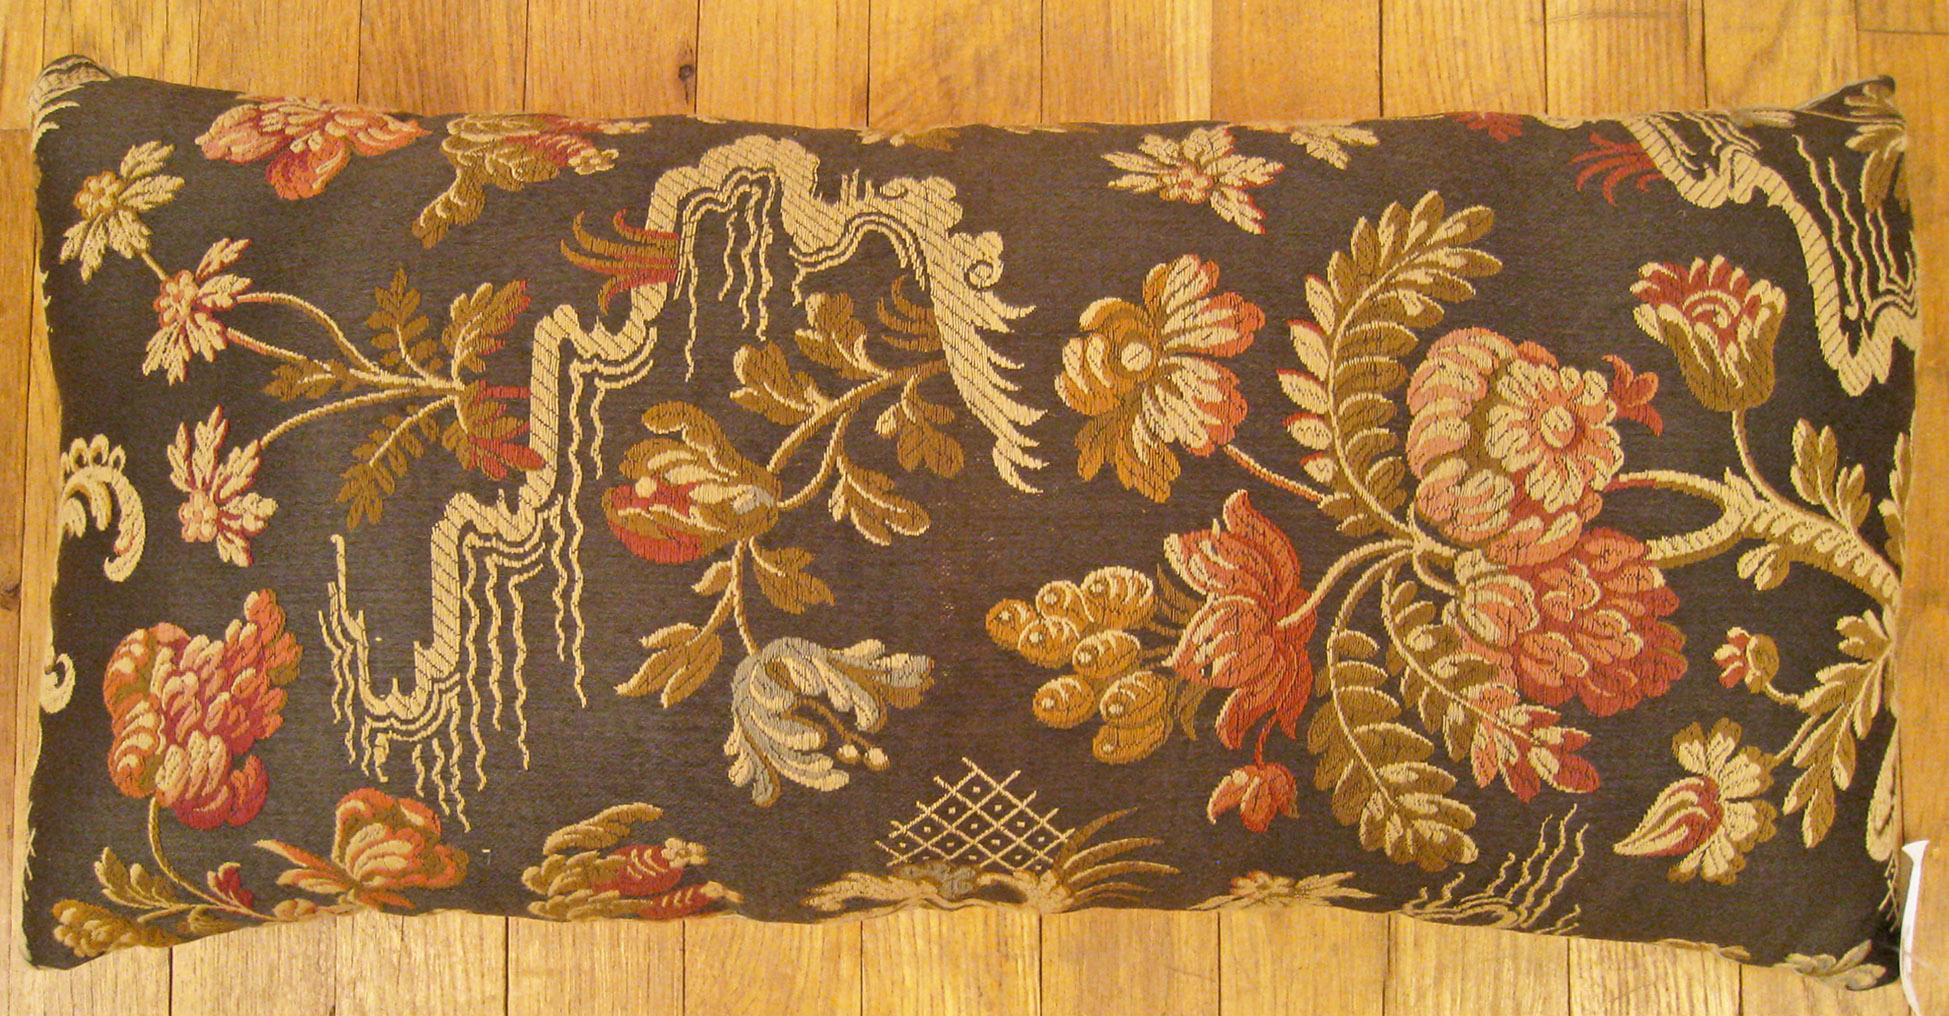 Antique Jacquard Tapestry pillow; size 1'0” x 2'0”.

An antique decorative pillow with a garden design allover a light brown central field, size 1'0